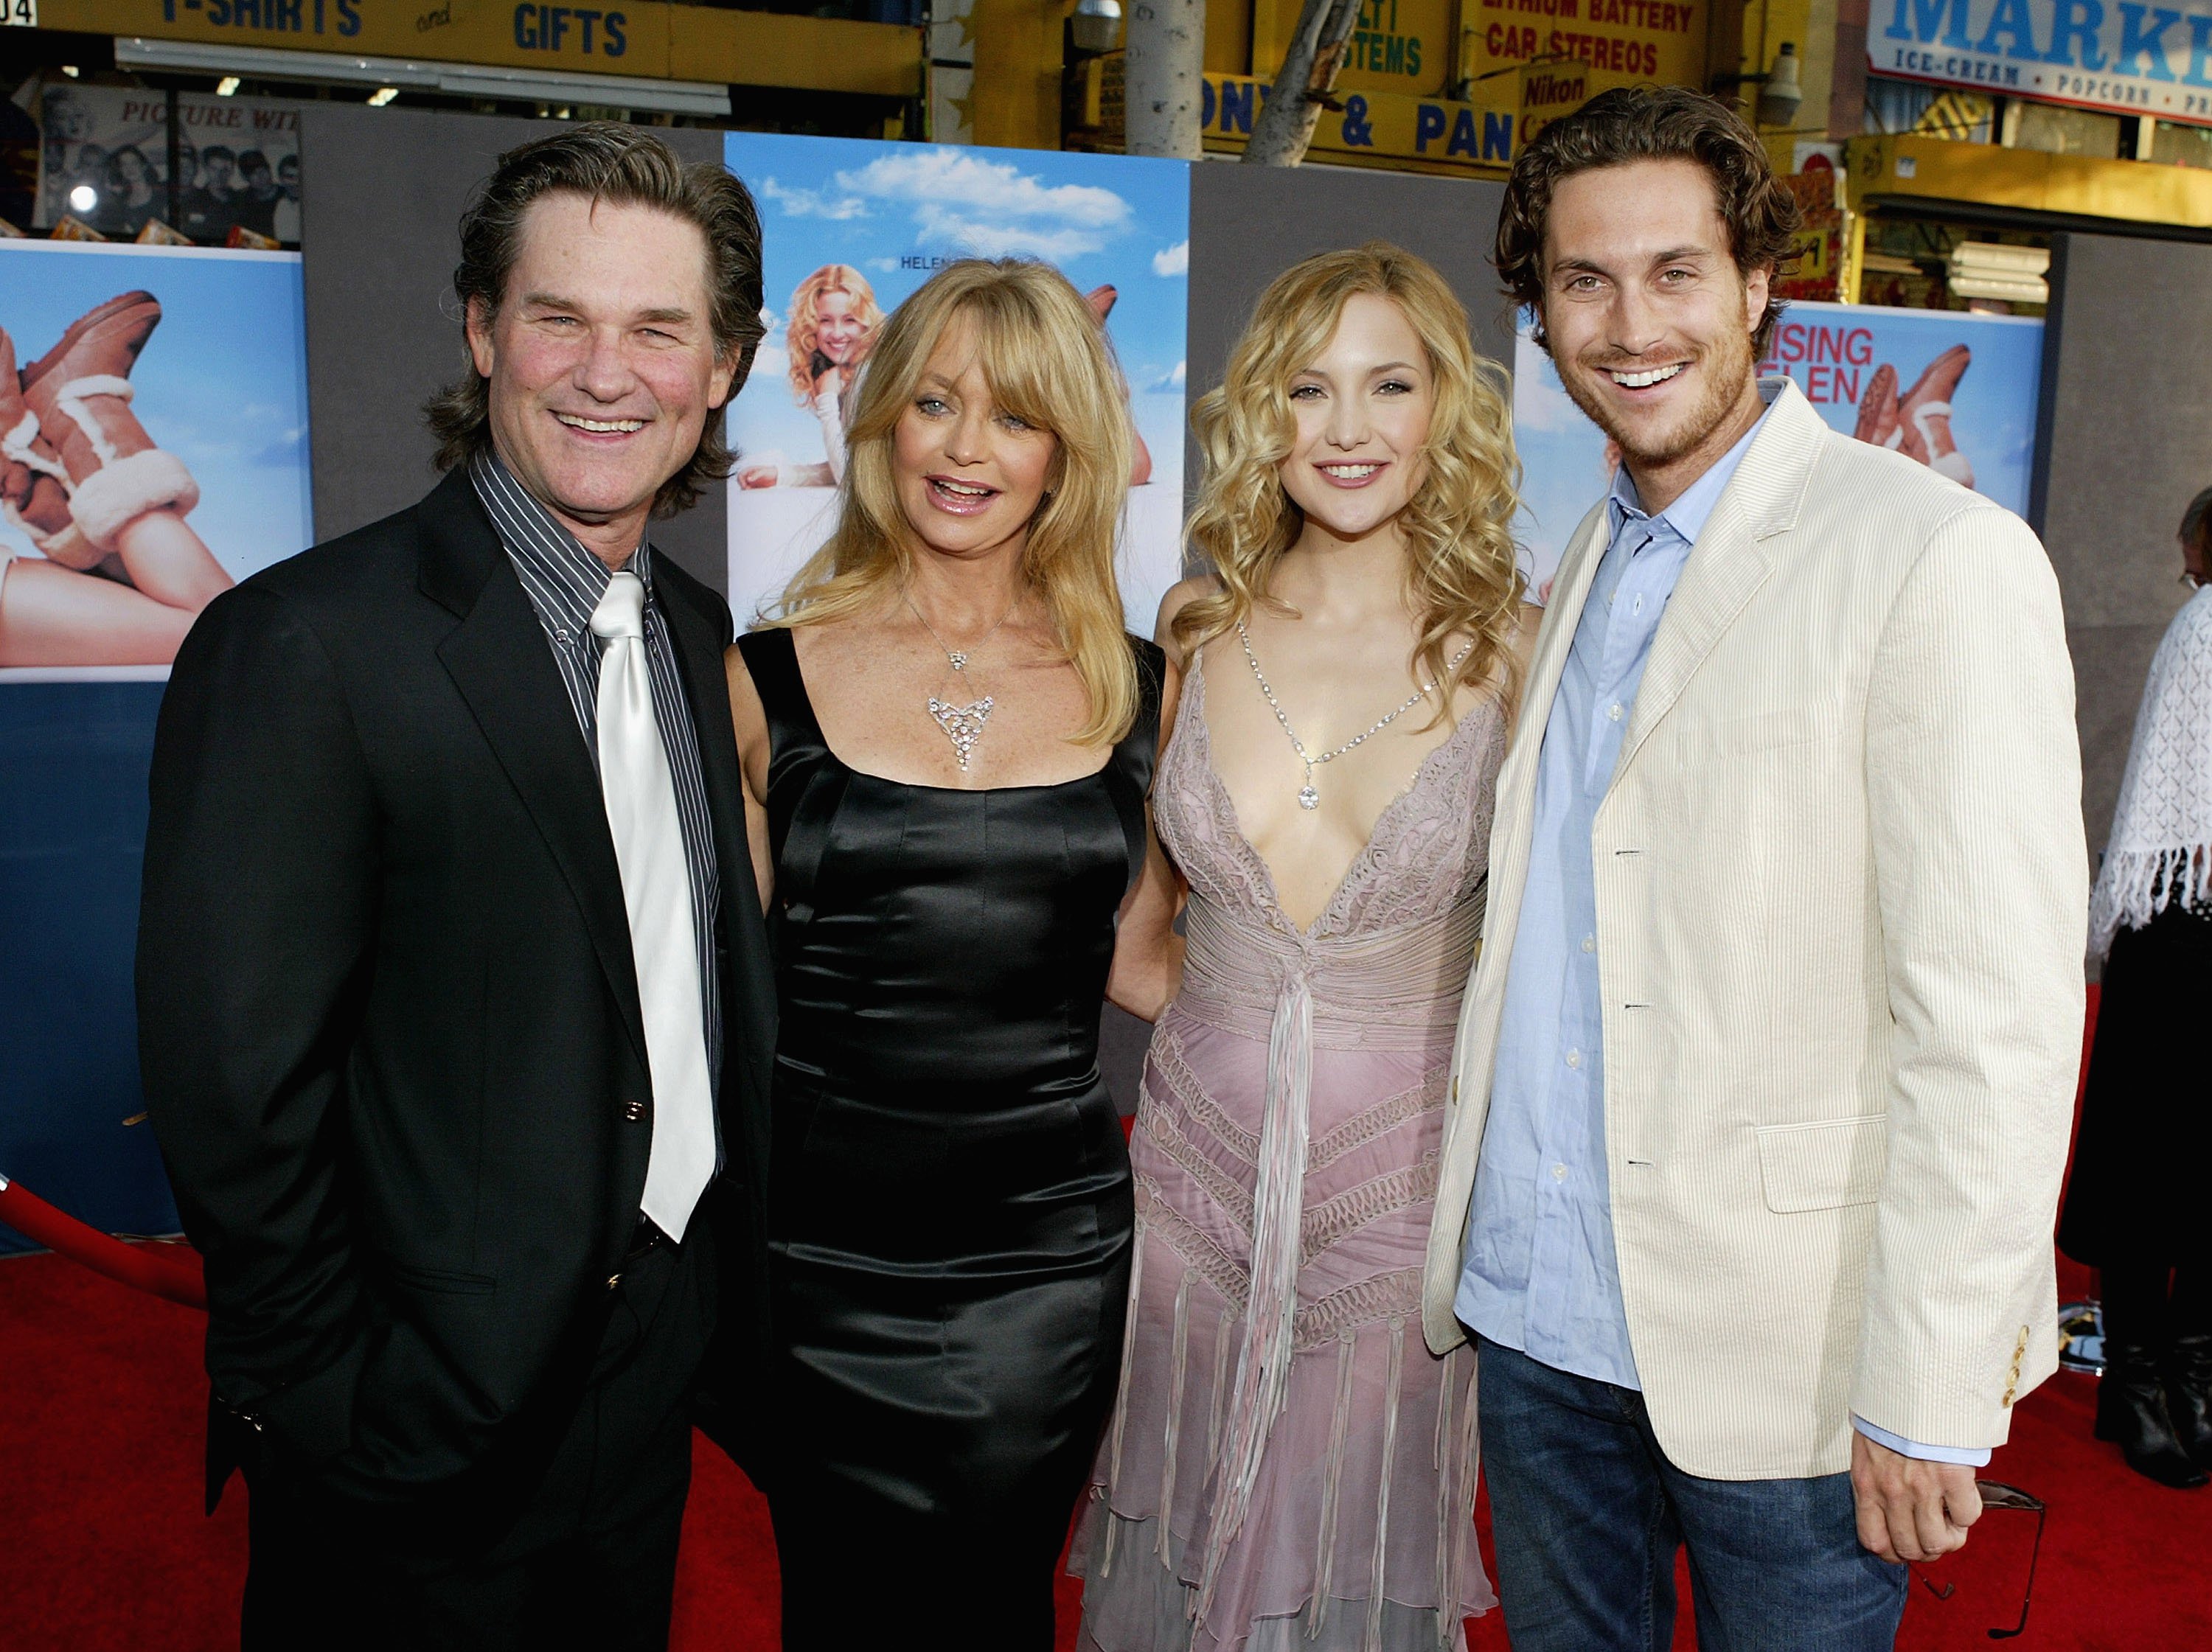 Actor Kurt Russell, actress Goldie Hawn, and her children, actress Kate Hudson and actor Oliver Hudson, on May 26, 2004 at the El Capitan Theatre, in Hollywood, California. | Source: Getty Images